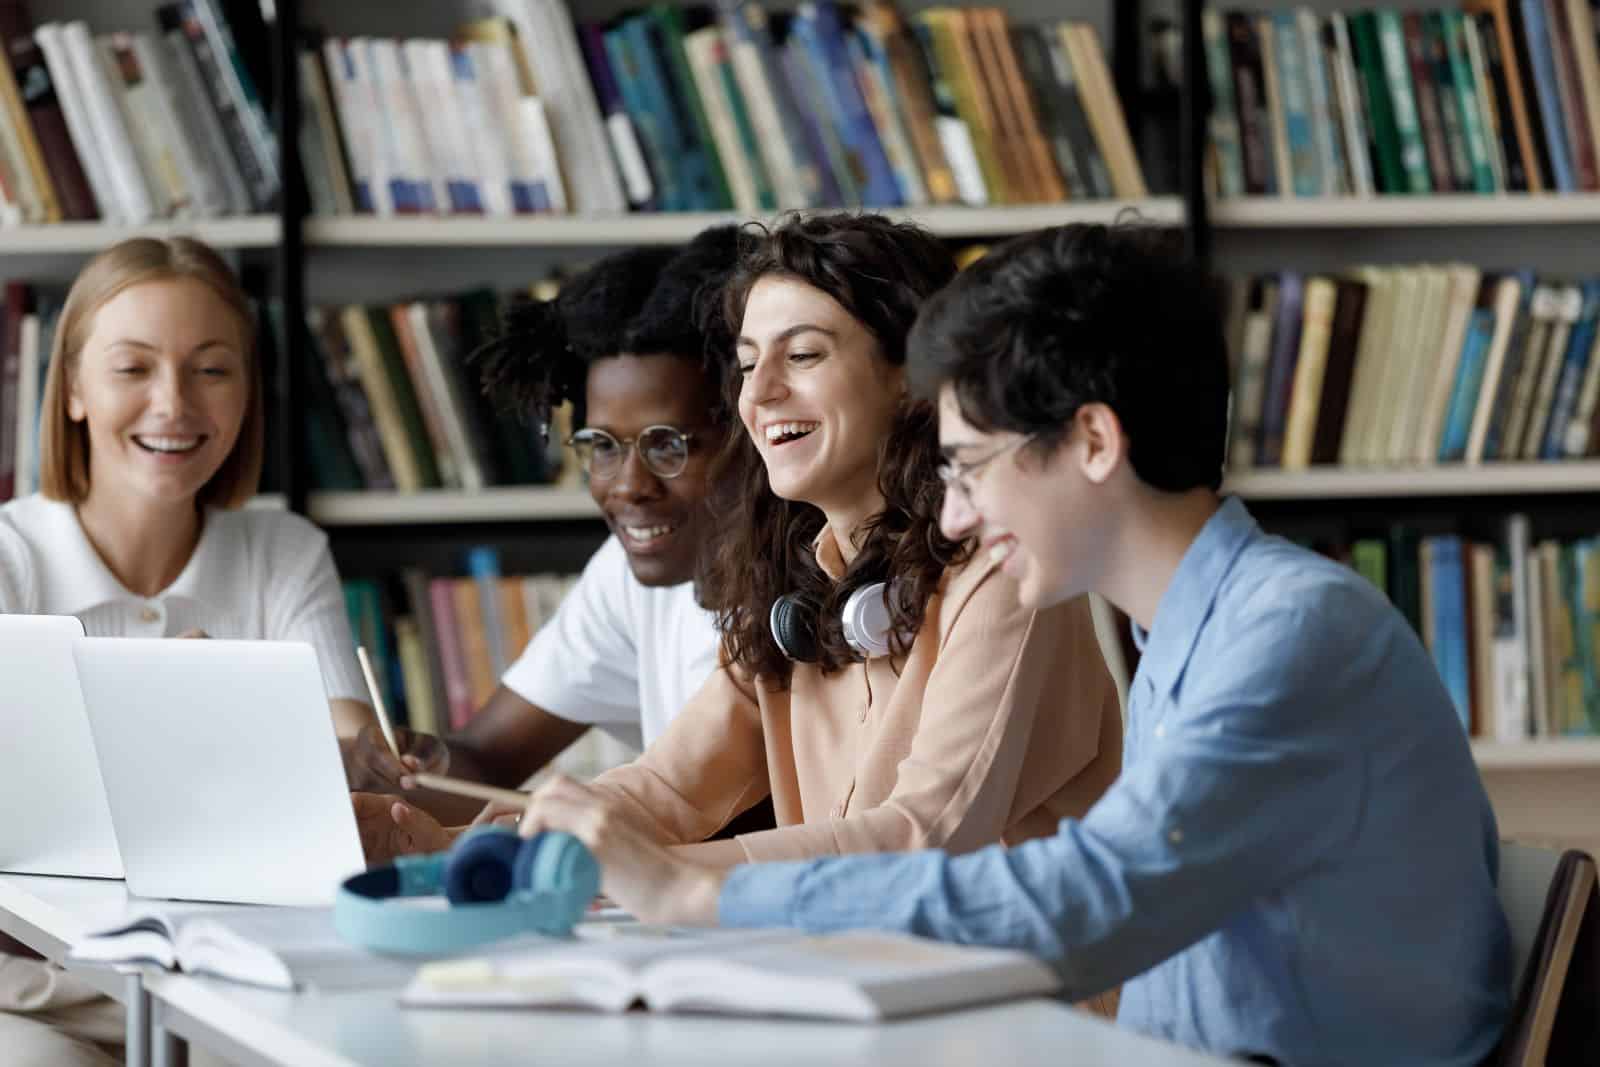 Image Credit: Shutterstock / fizkes <p><span>At the same time, college often exposes students to diverse cultures and perspectives. These opportunities for students to broaden their horizons and learn from many different people can ignite a passion for lifelong learning and education.</span></p>